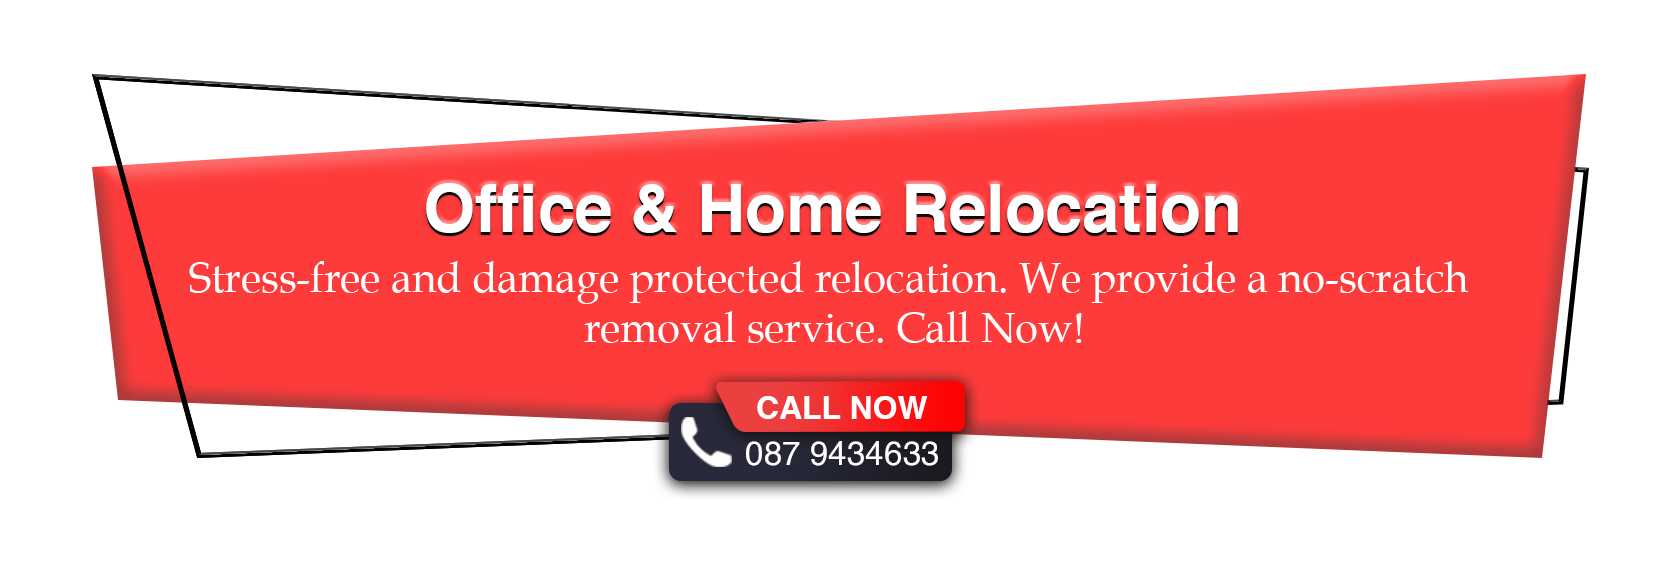 Office Home Relocation